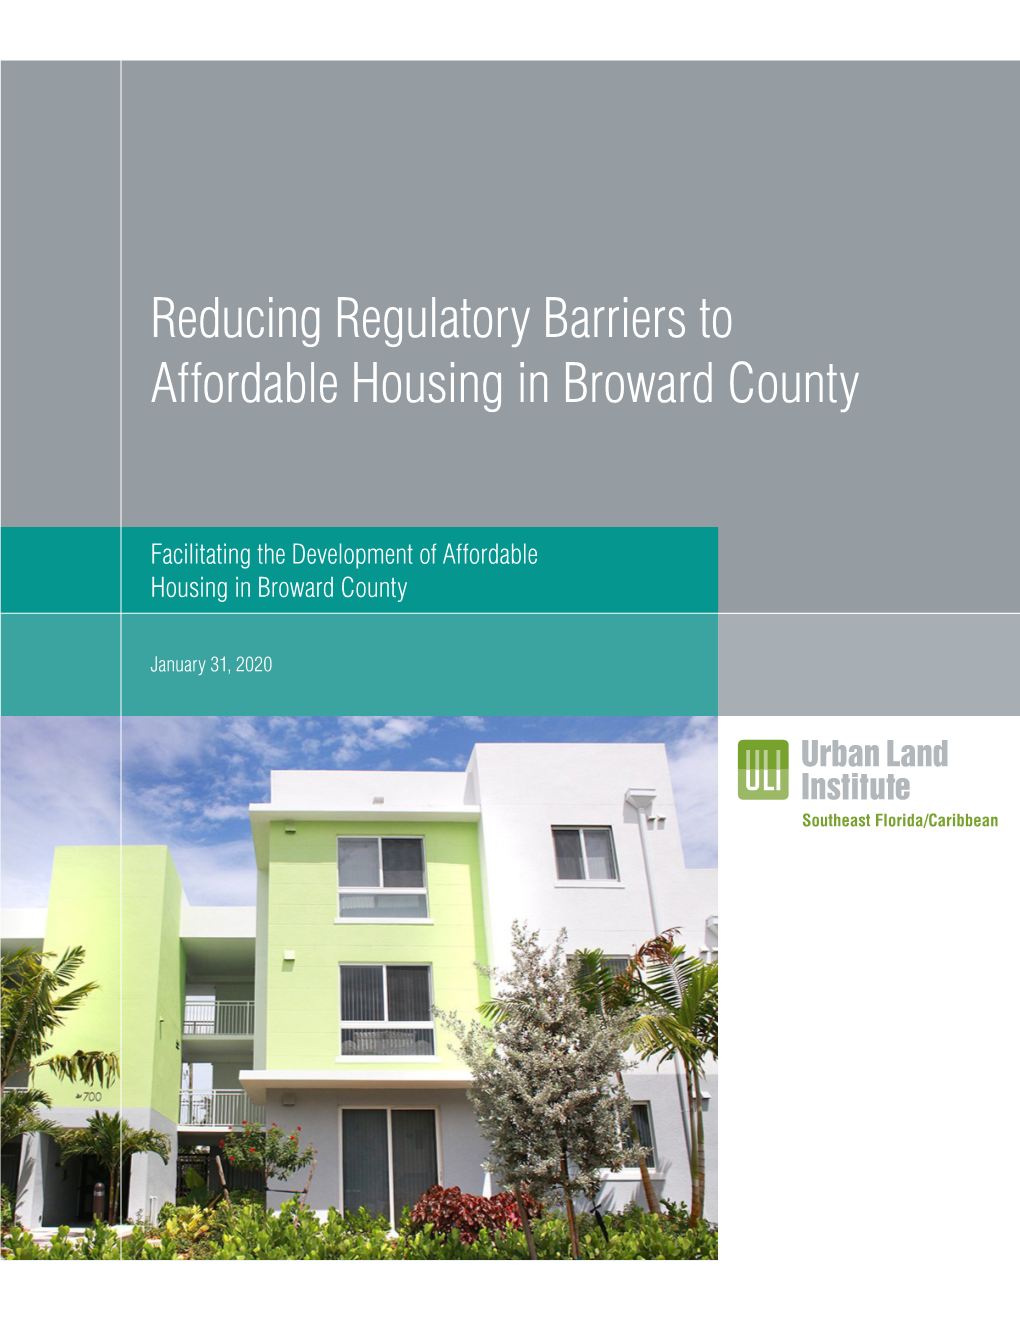 Reducing Regulatory Barriers to Affordable Housing in Broward County